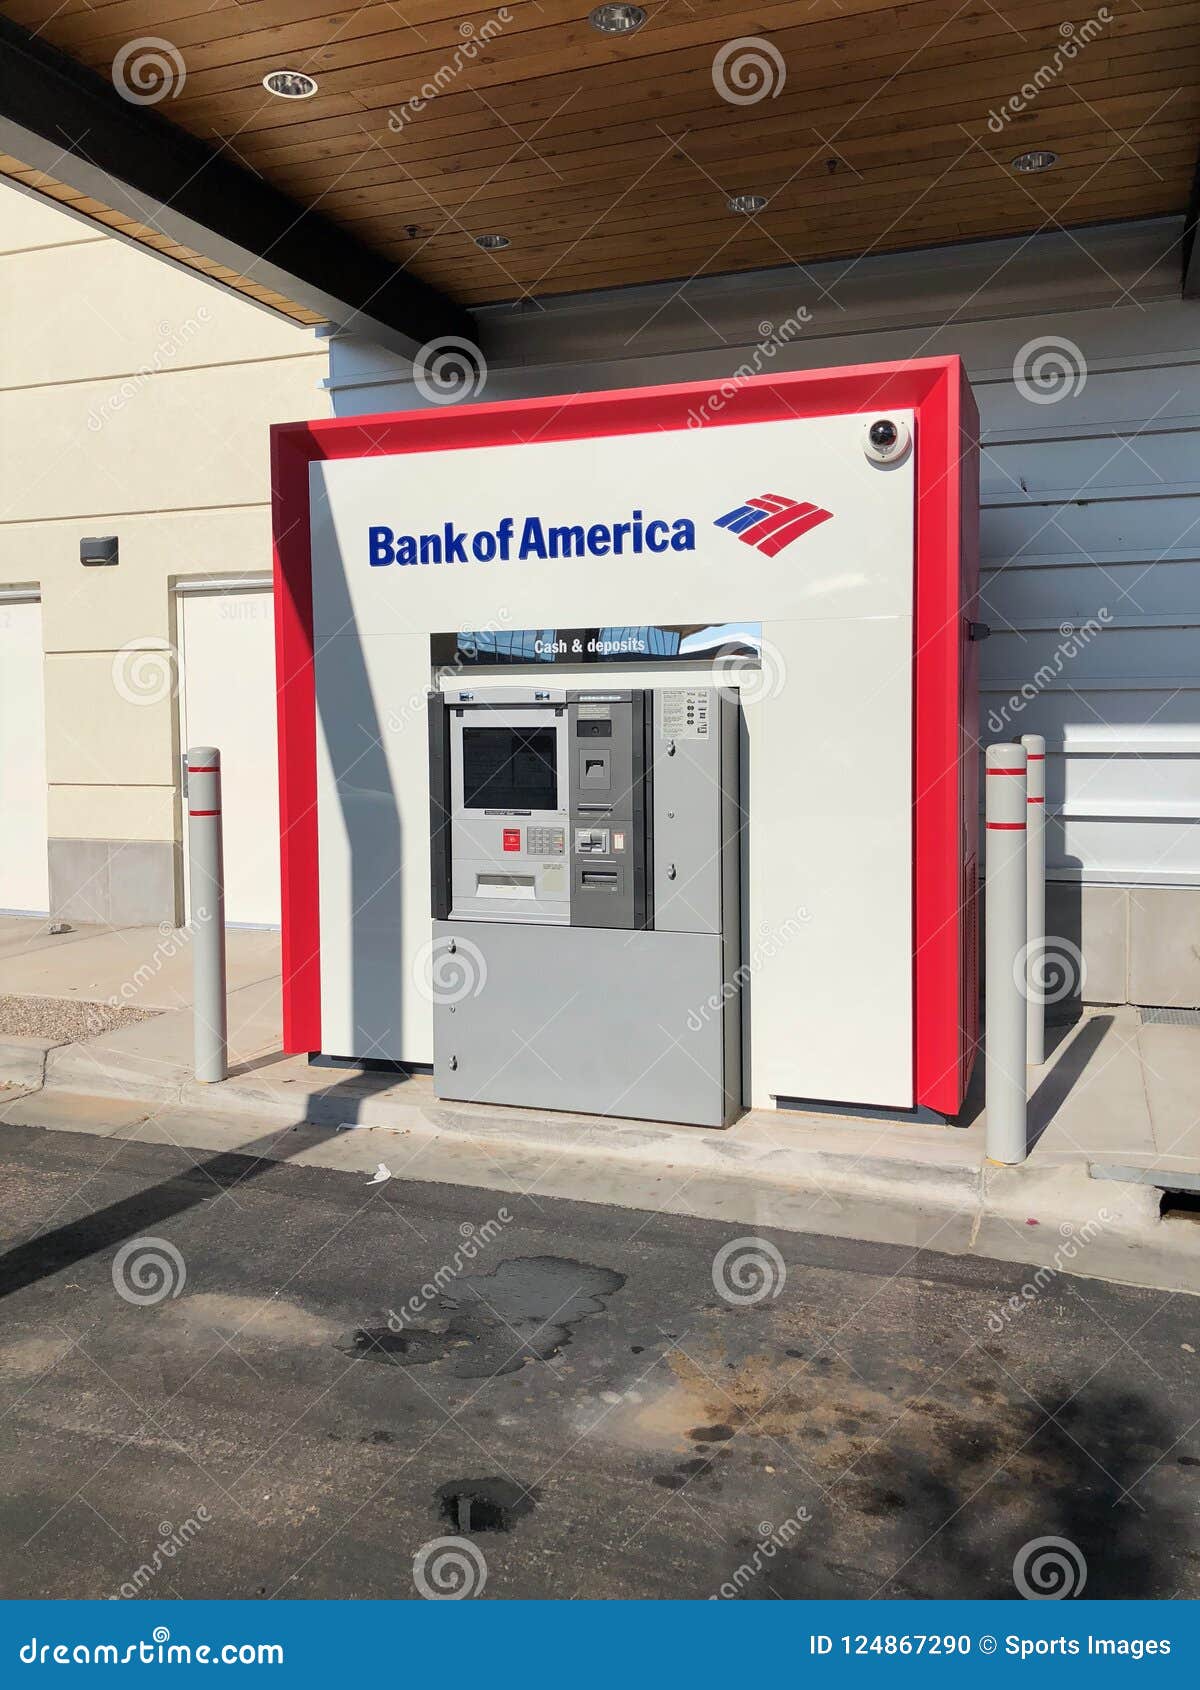 All 102+ Images bank of america (with drive-thru atm) atlanta photos Excellent